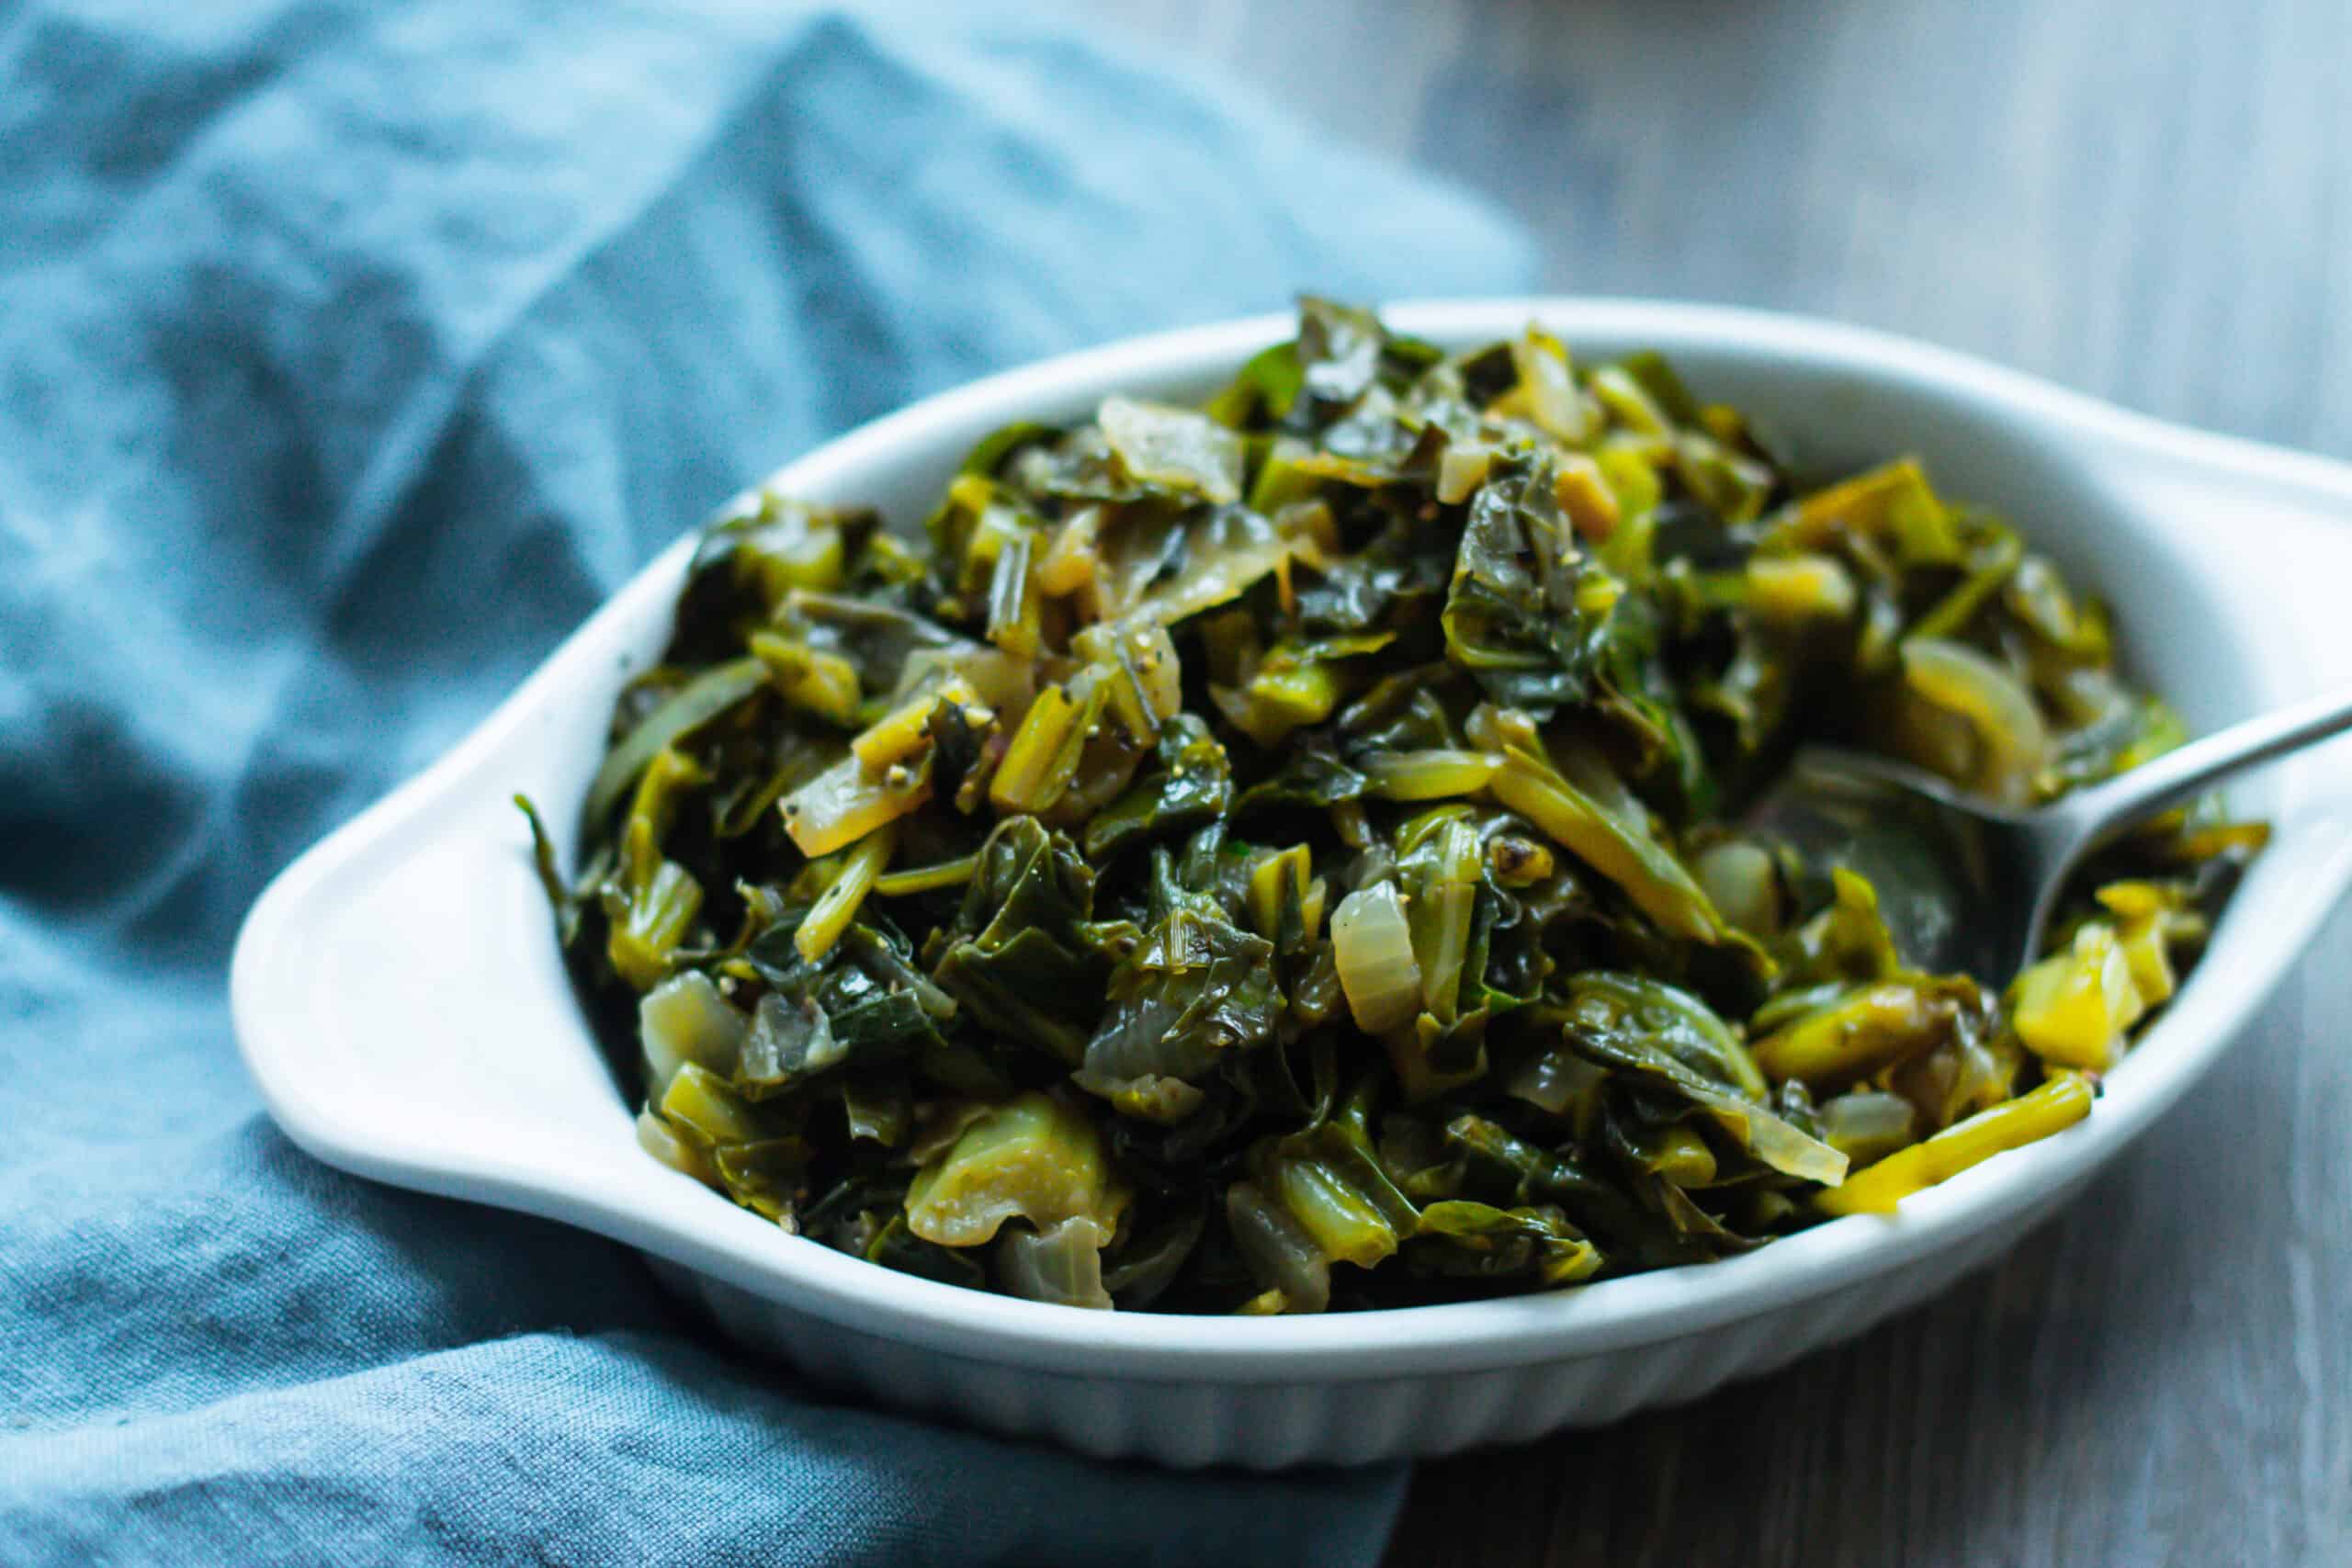 A dish of cooked collard greens